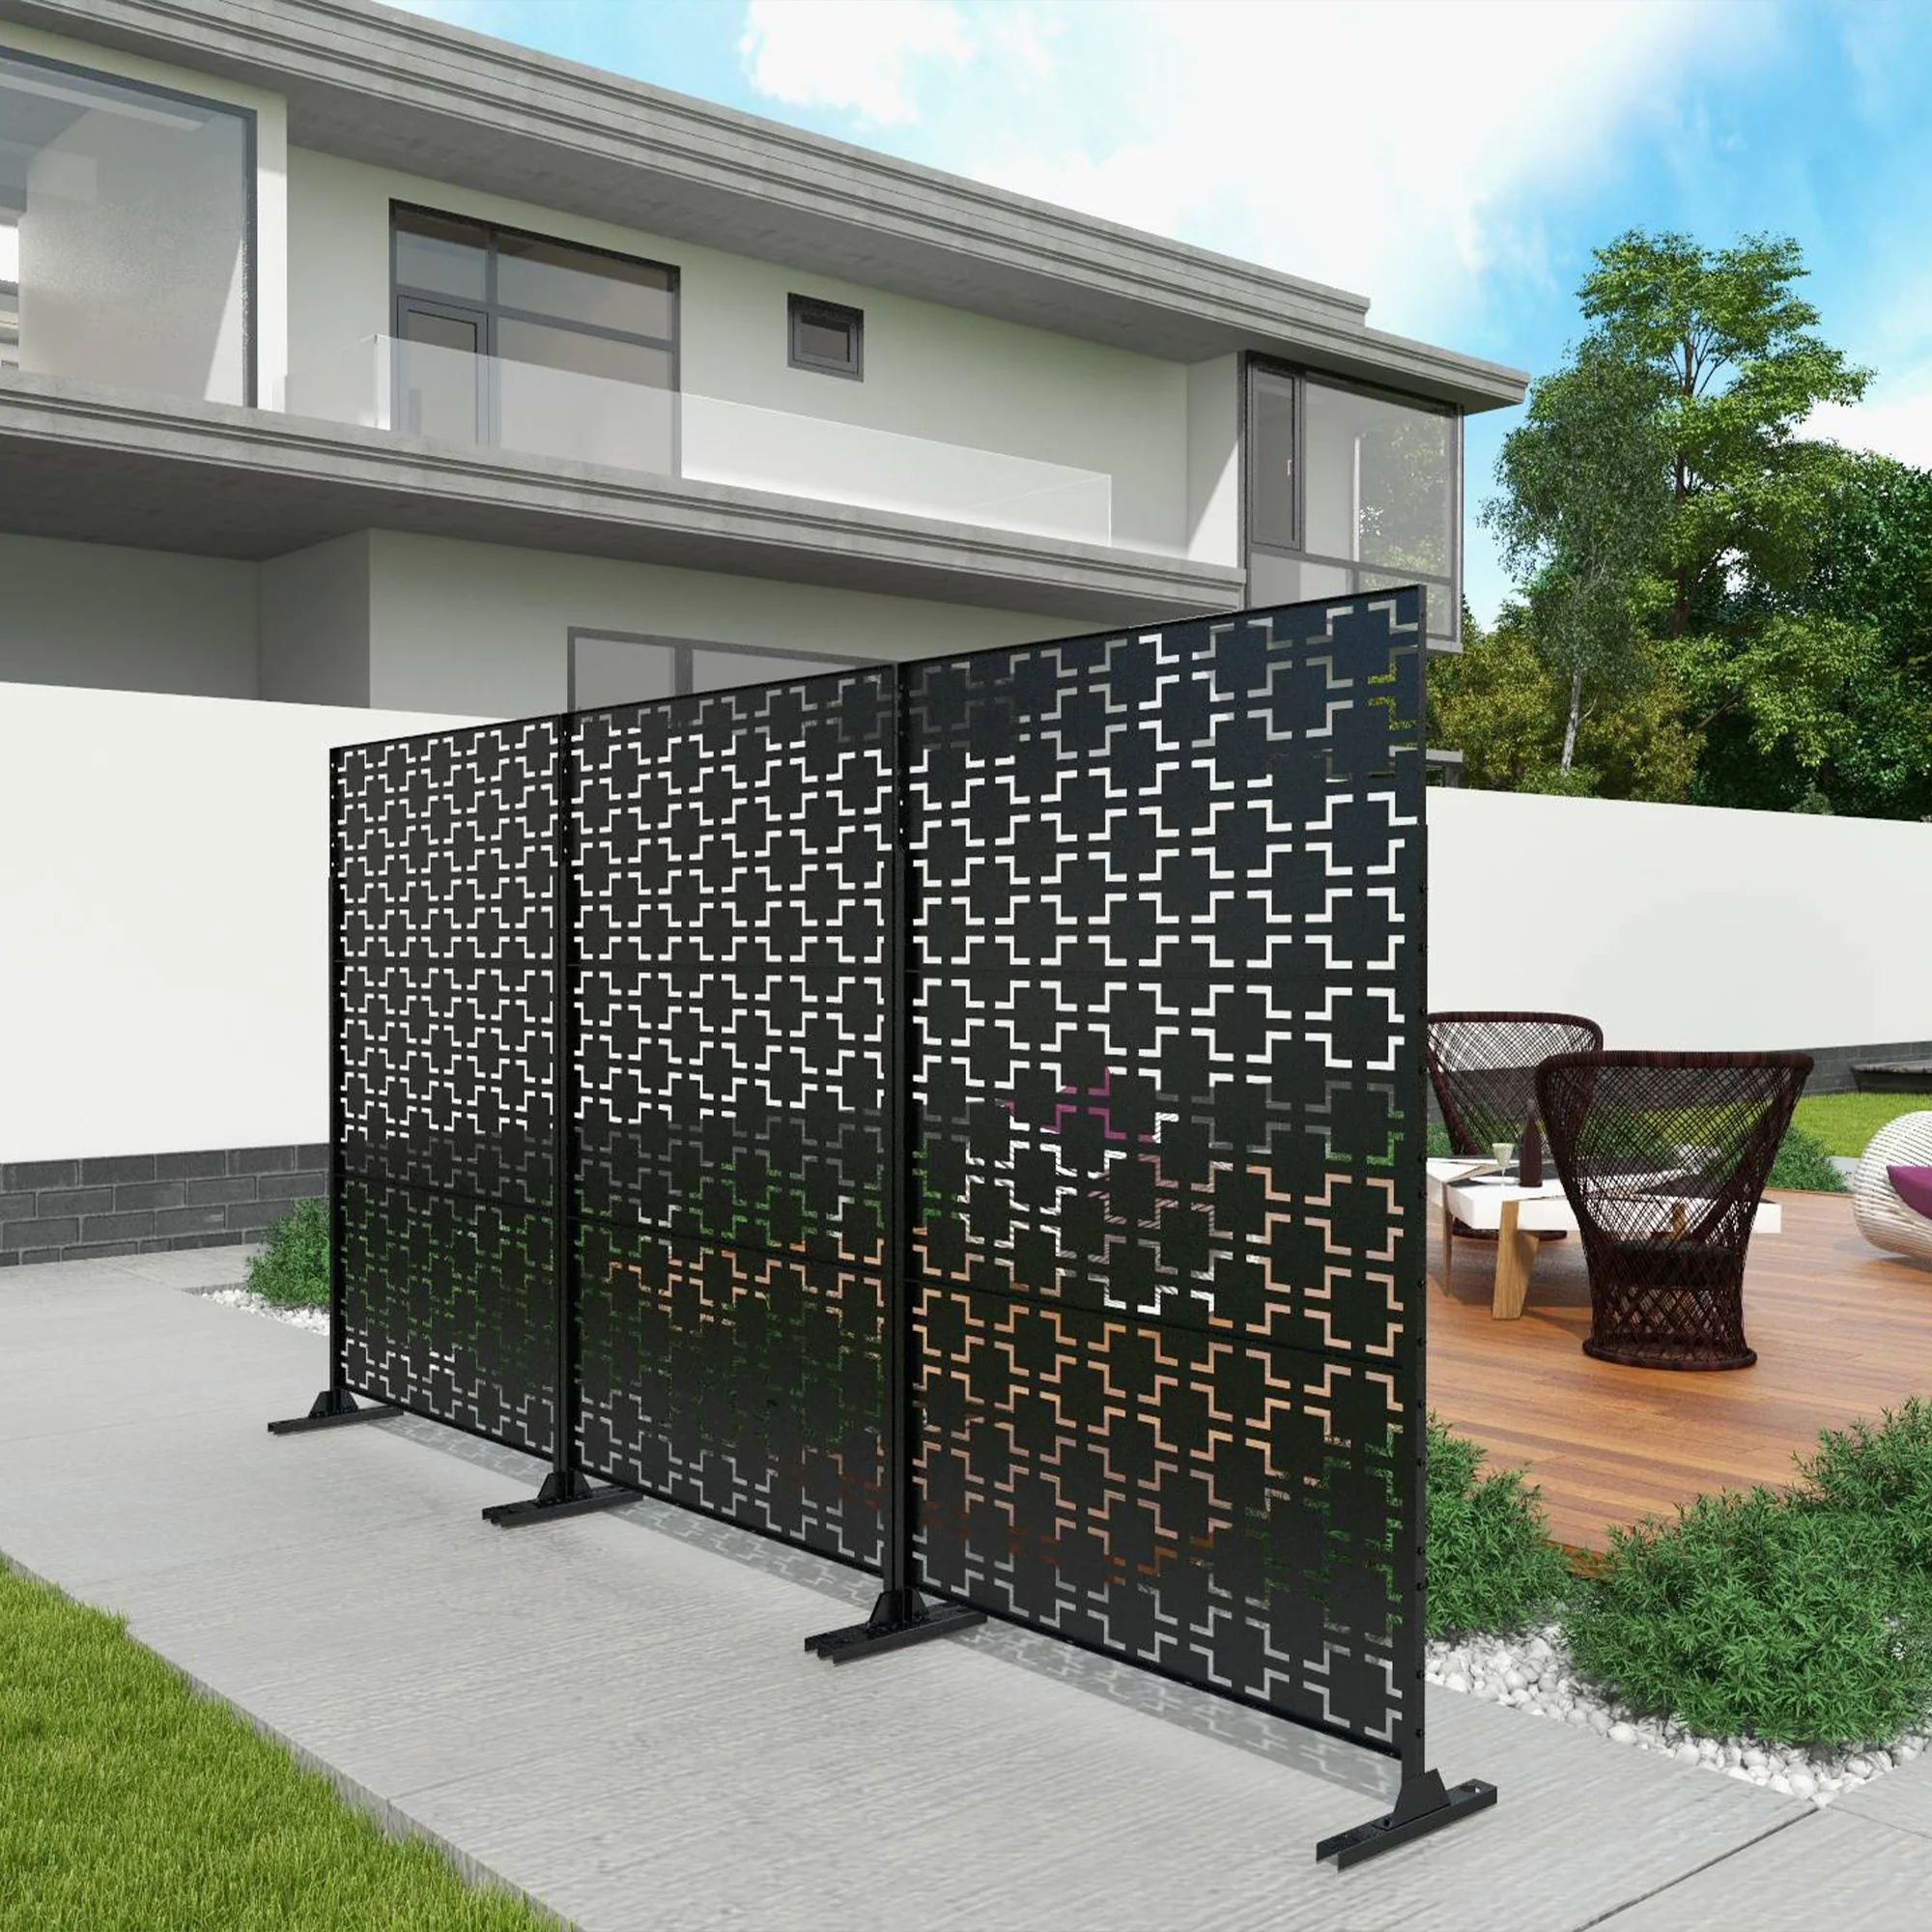 Outdoor Privacy Screen: The Ultimate Guide to Backyards